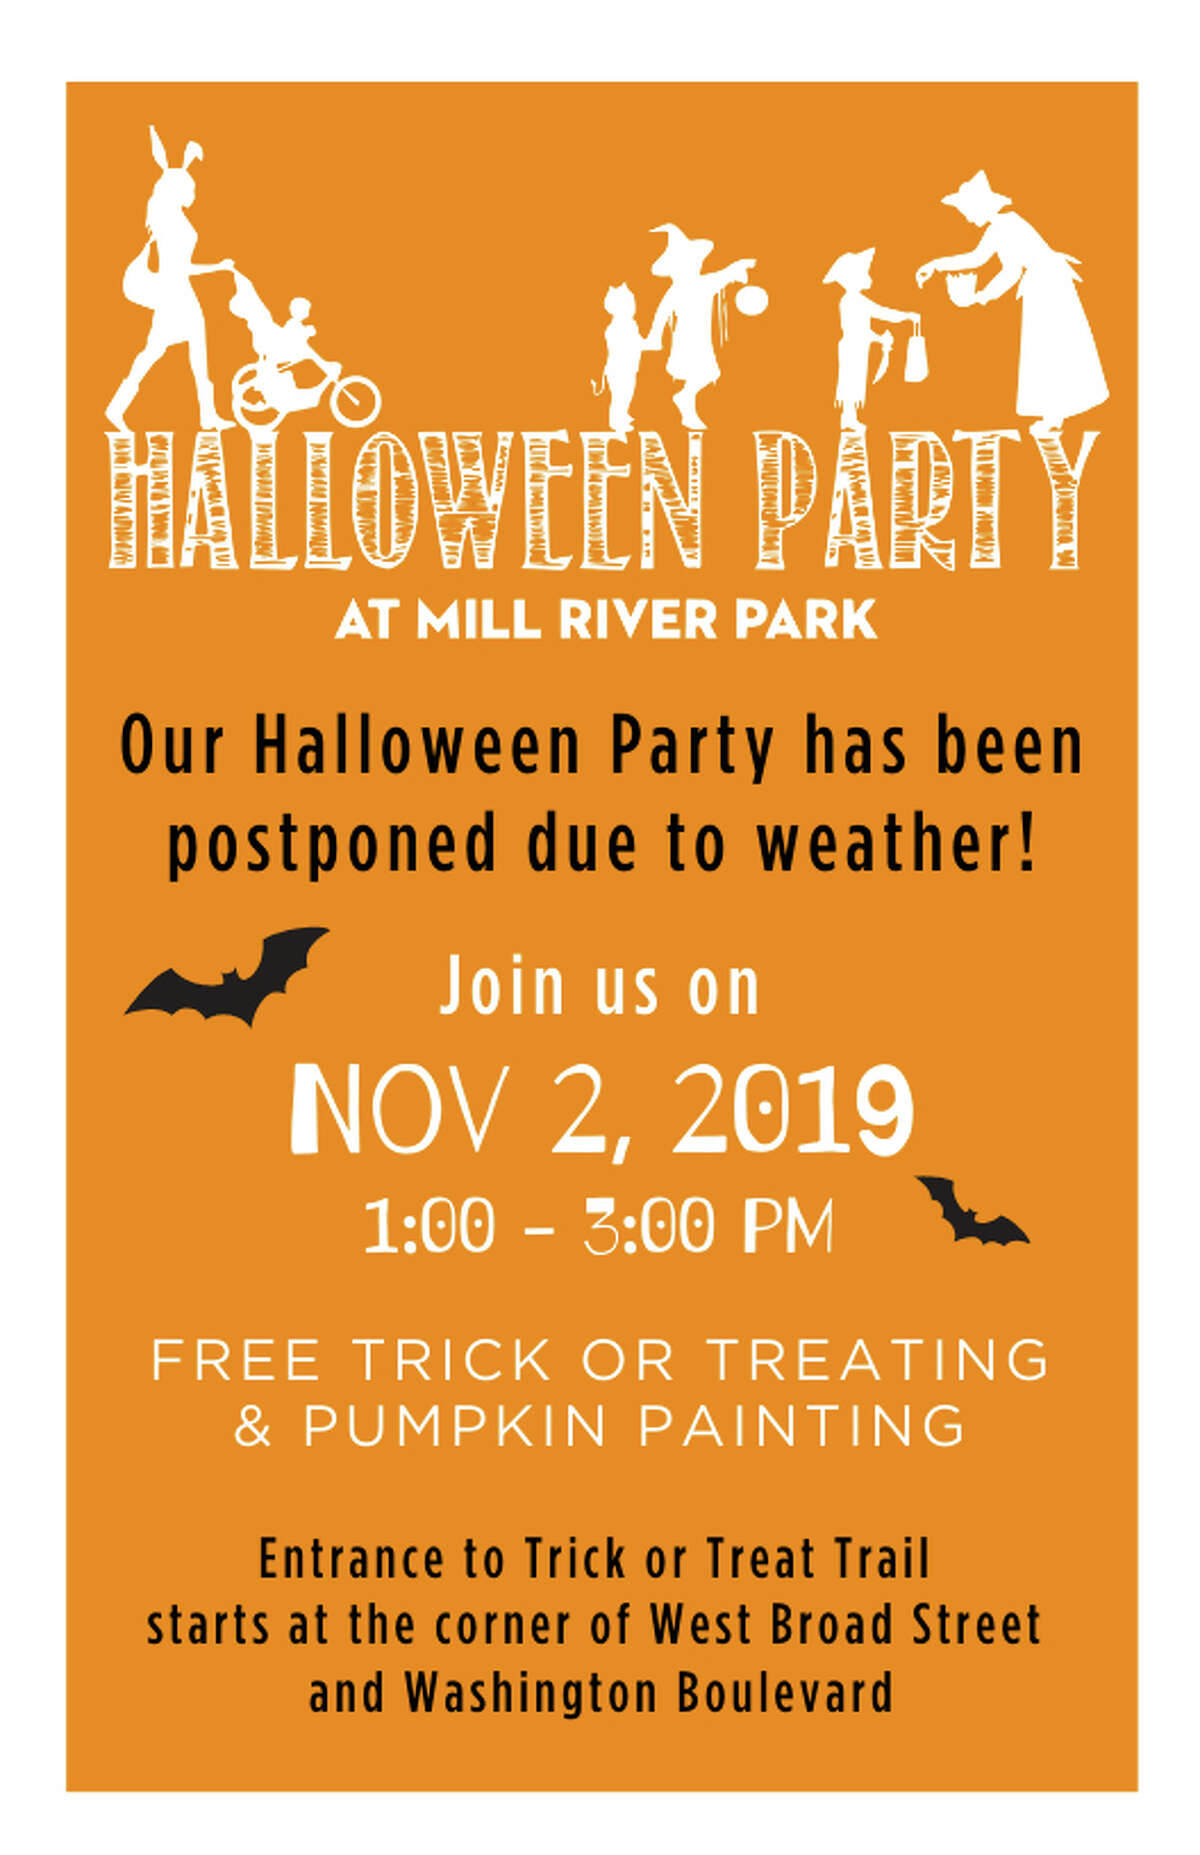 Rain has pushed the family Halloween Party at Mill River Park to Saturday.